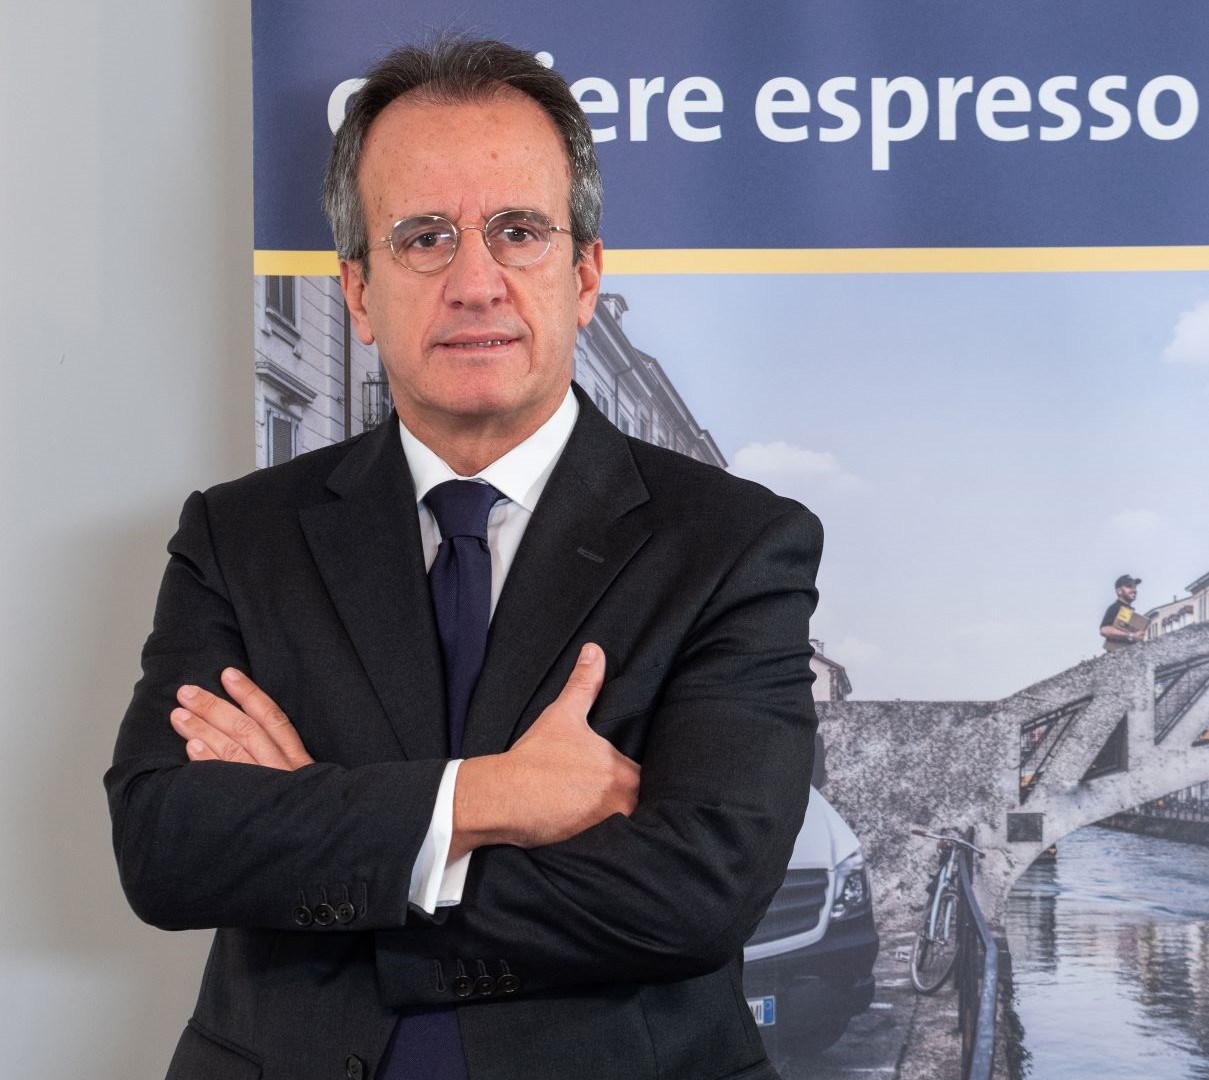 GLS: Francesco Pellerano appointed General Manager and Nicola Campio appointed Director of Finance and Administration